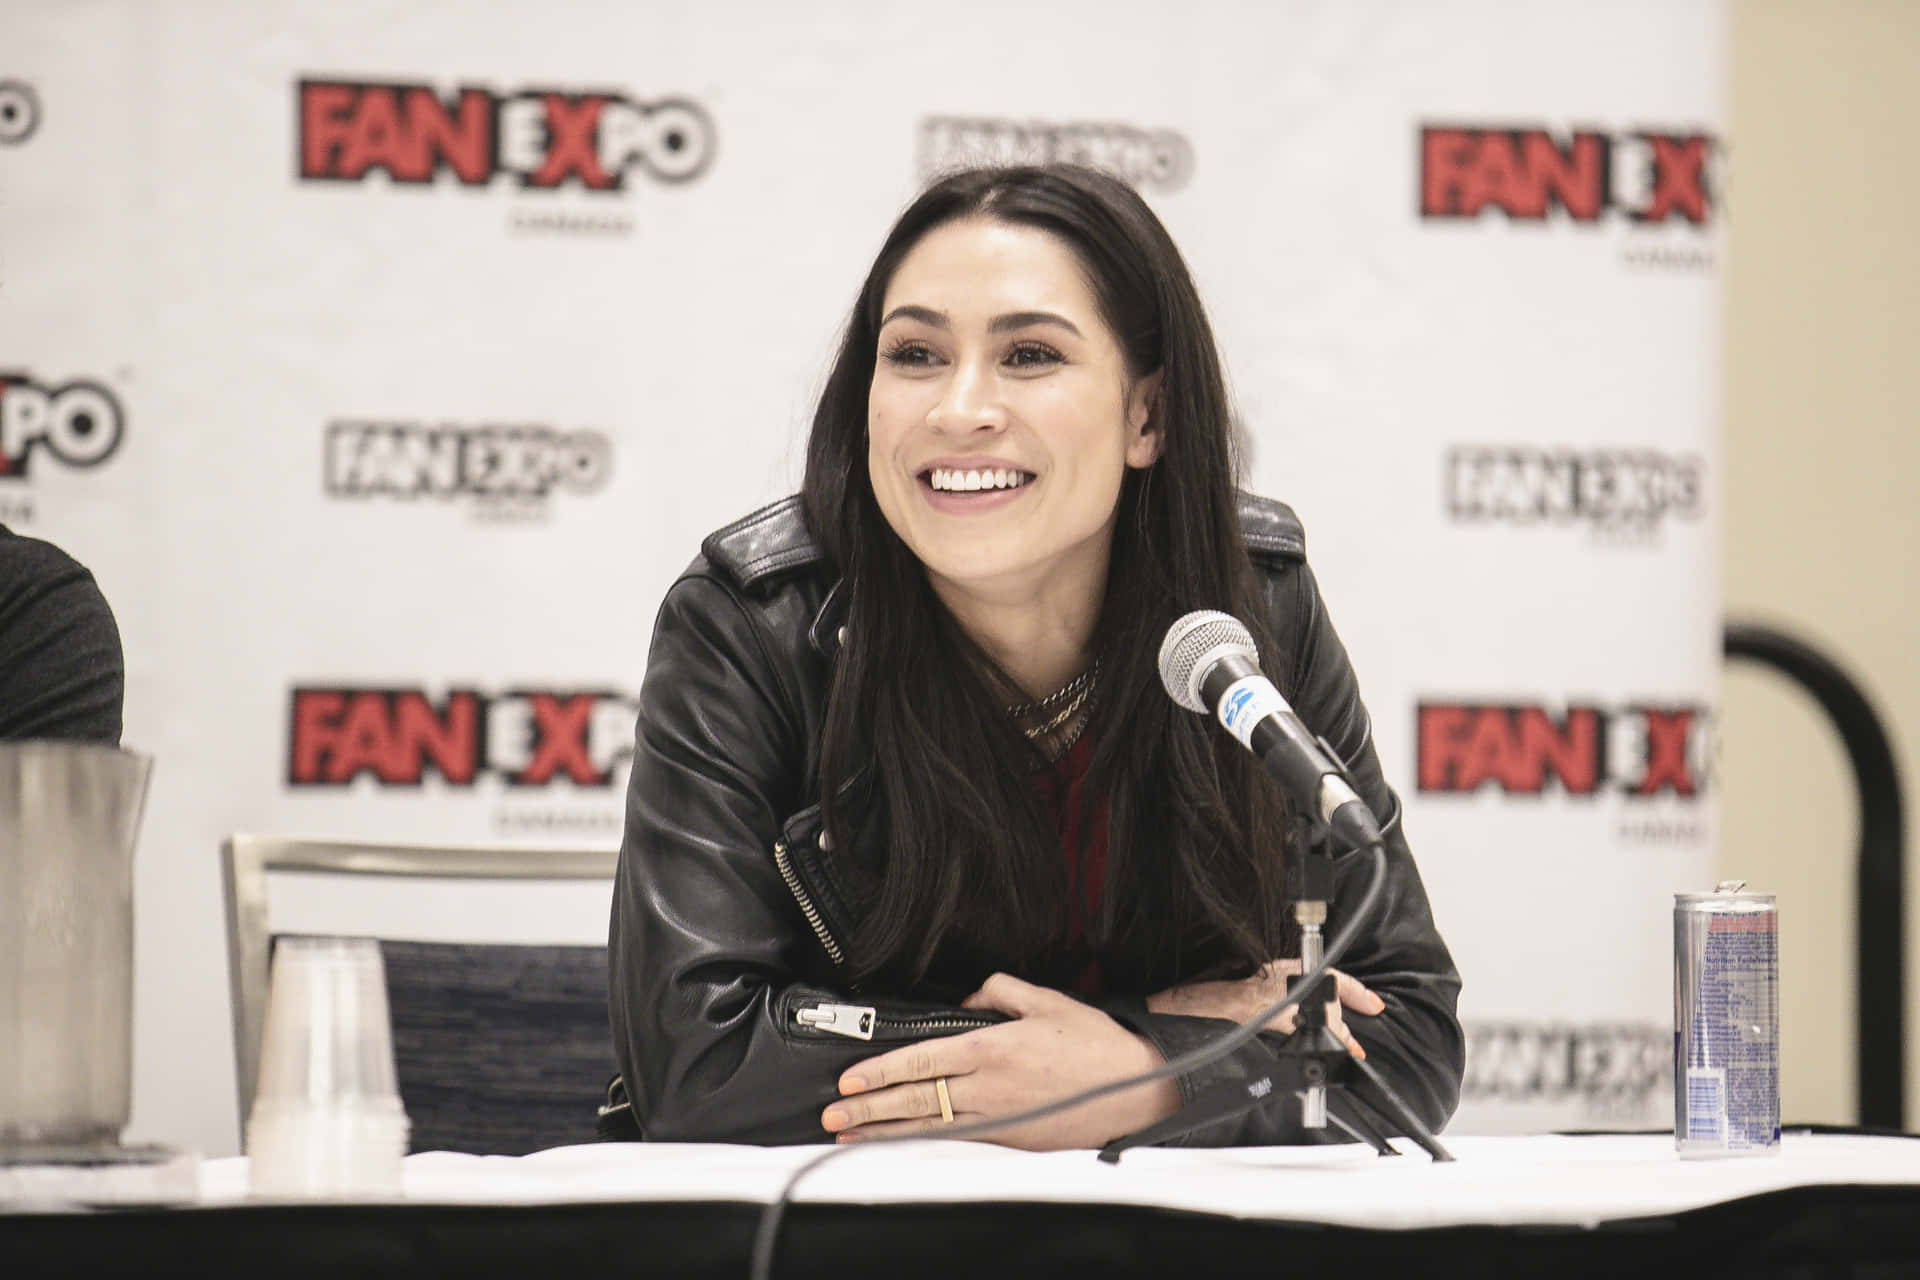 Cassie Steele Fan Expo Panel Discussion Wallpaper